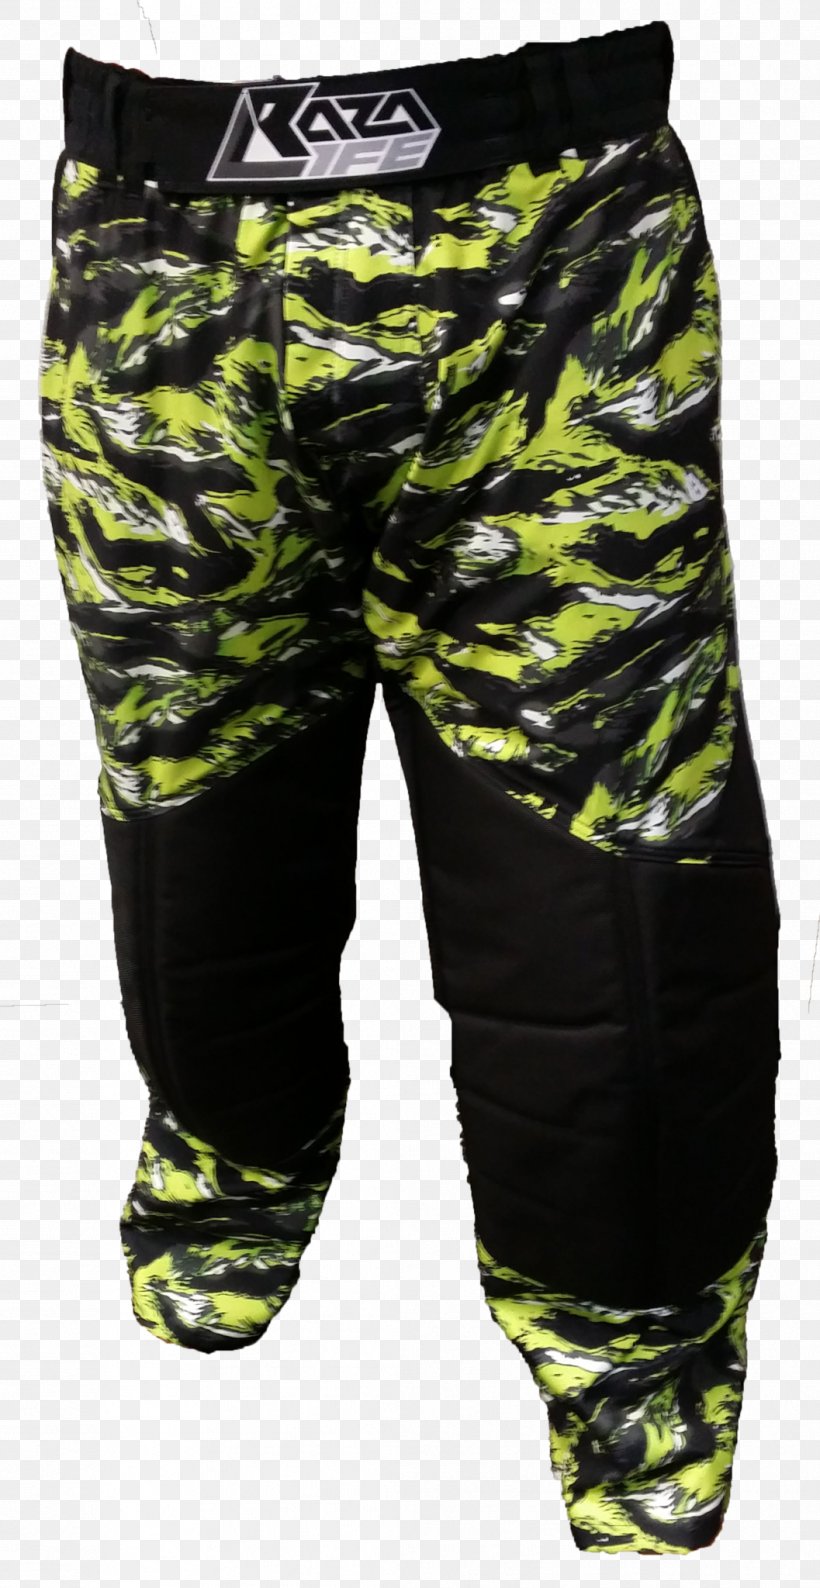 Shorts Pants HMD Global Suit Jersey, PNG, 1057x2048px, Shorts, Black, Hmd Global, Hockey Protective Pants Ski Shorts, Jersey Download Free